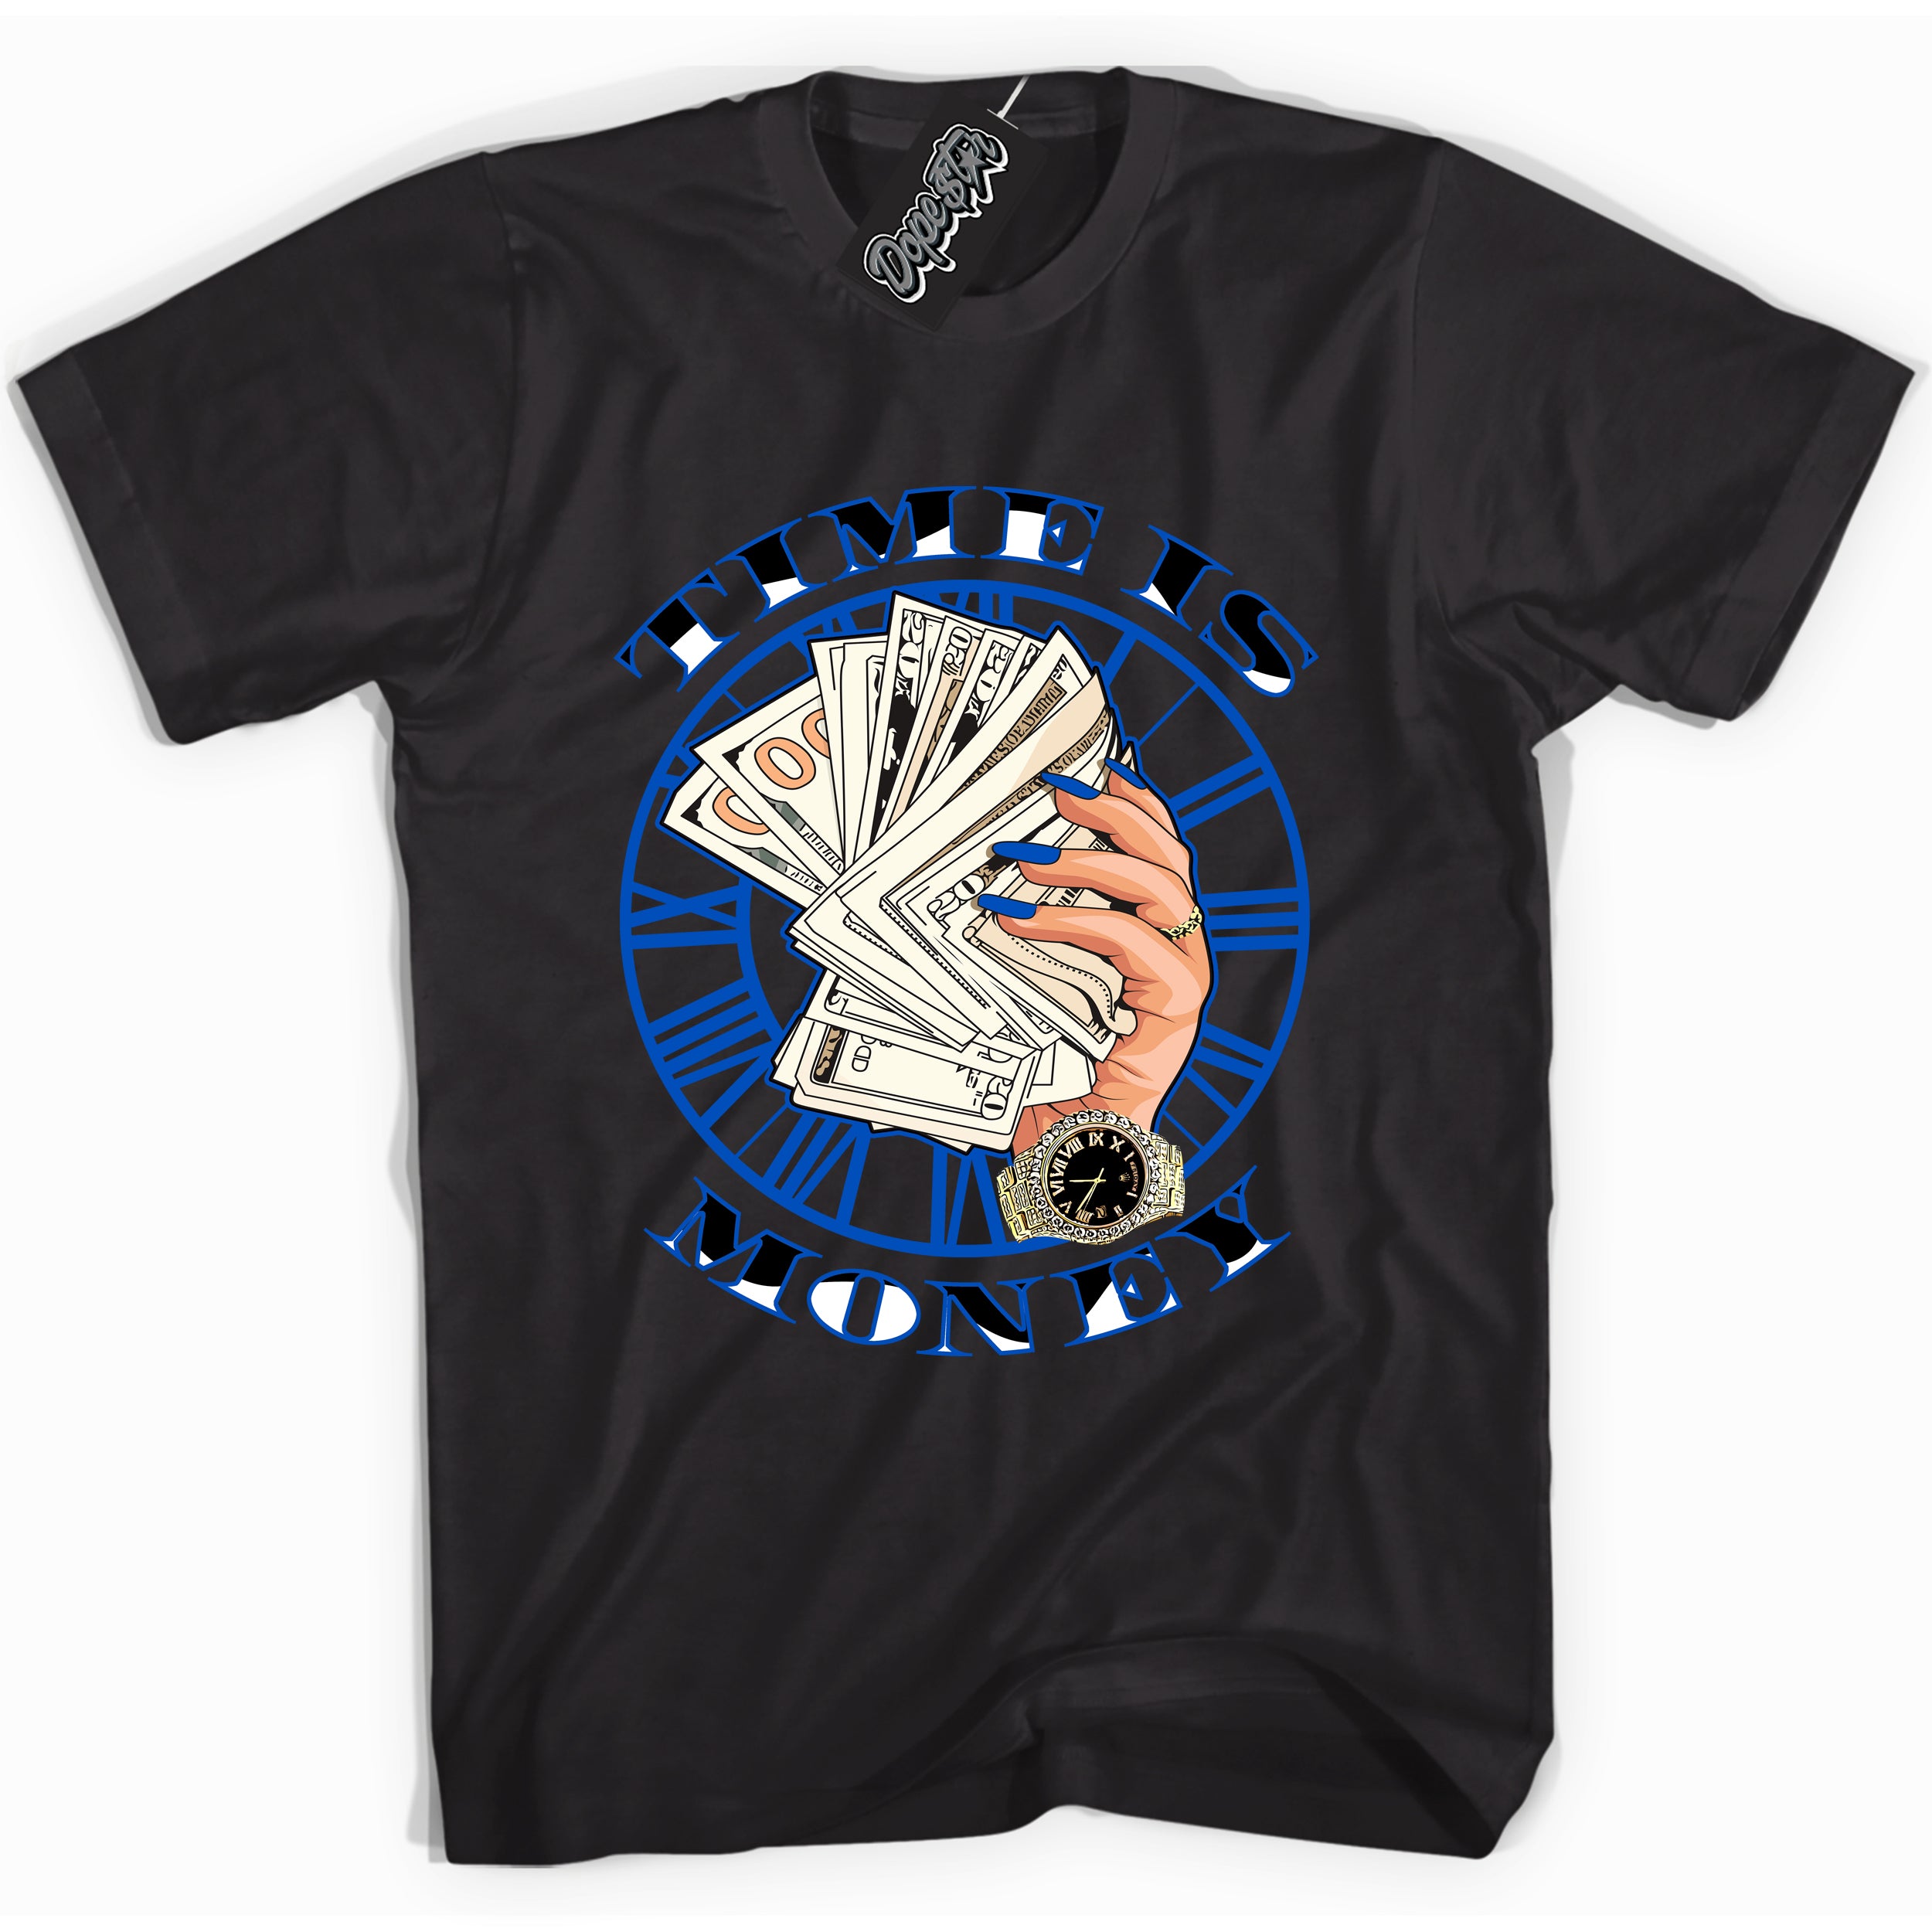 Cool Black graphic tee with "Time Is Money" design, that perfectly matches Royal Reimagined 1s sneakers 